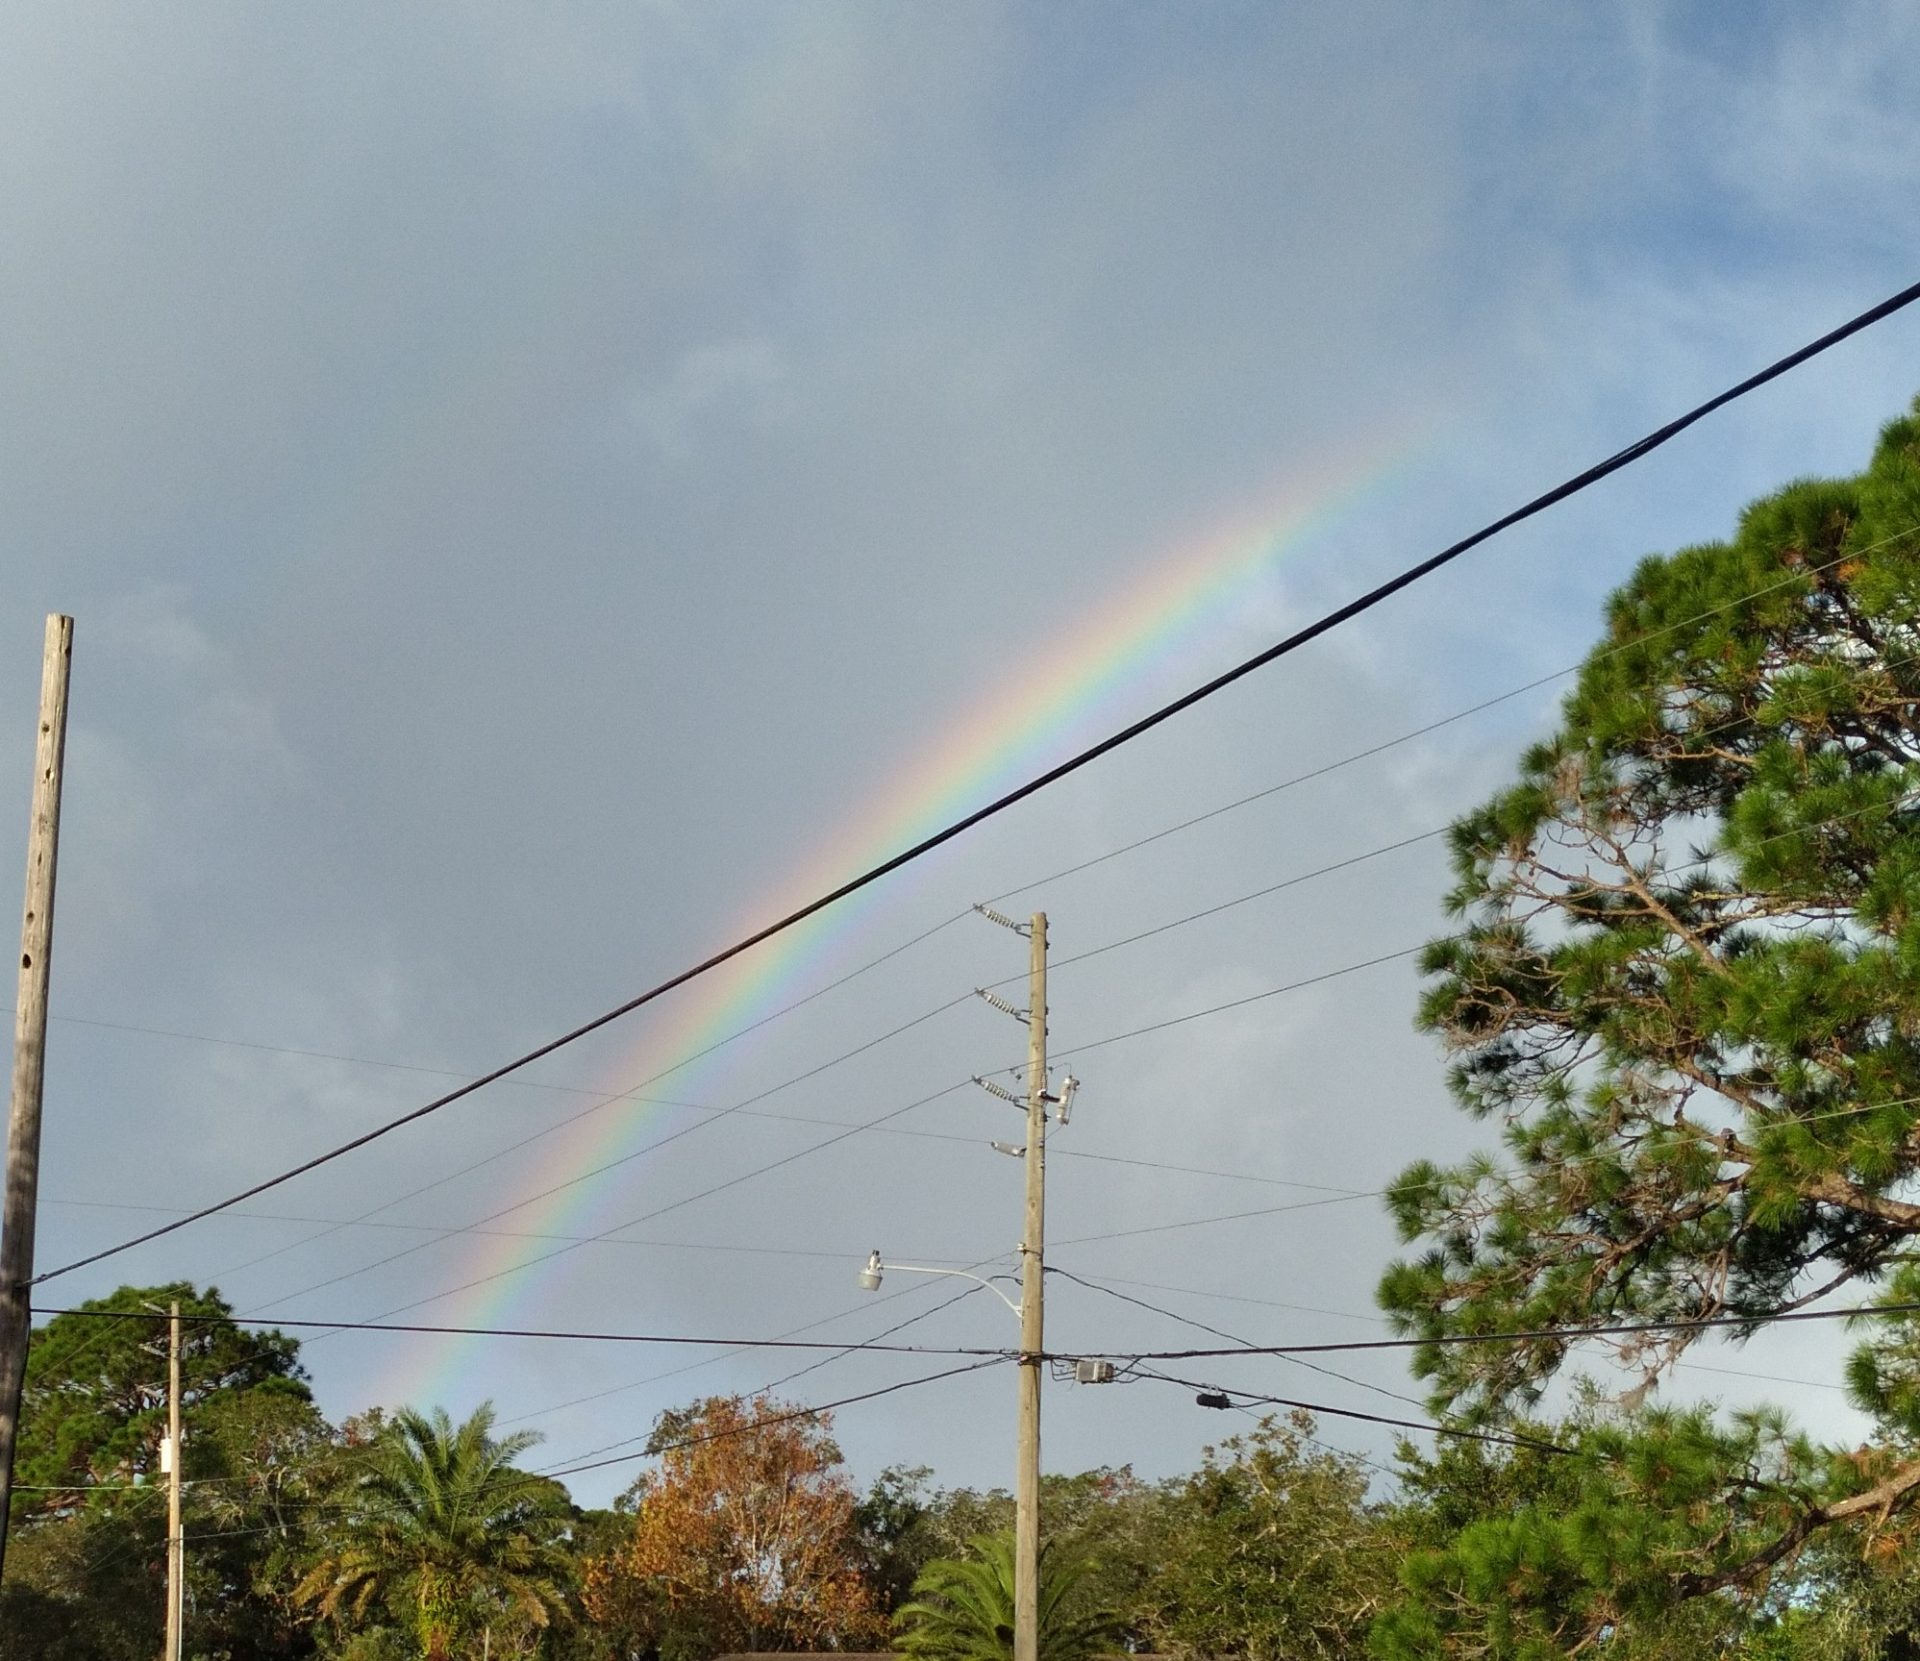 "Mom's Rainbow", morning of November 6th we walked out front looked up and mom was saying hello from Heaven. Hi mom we love you